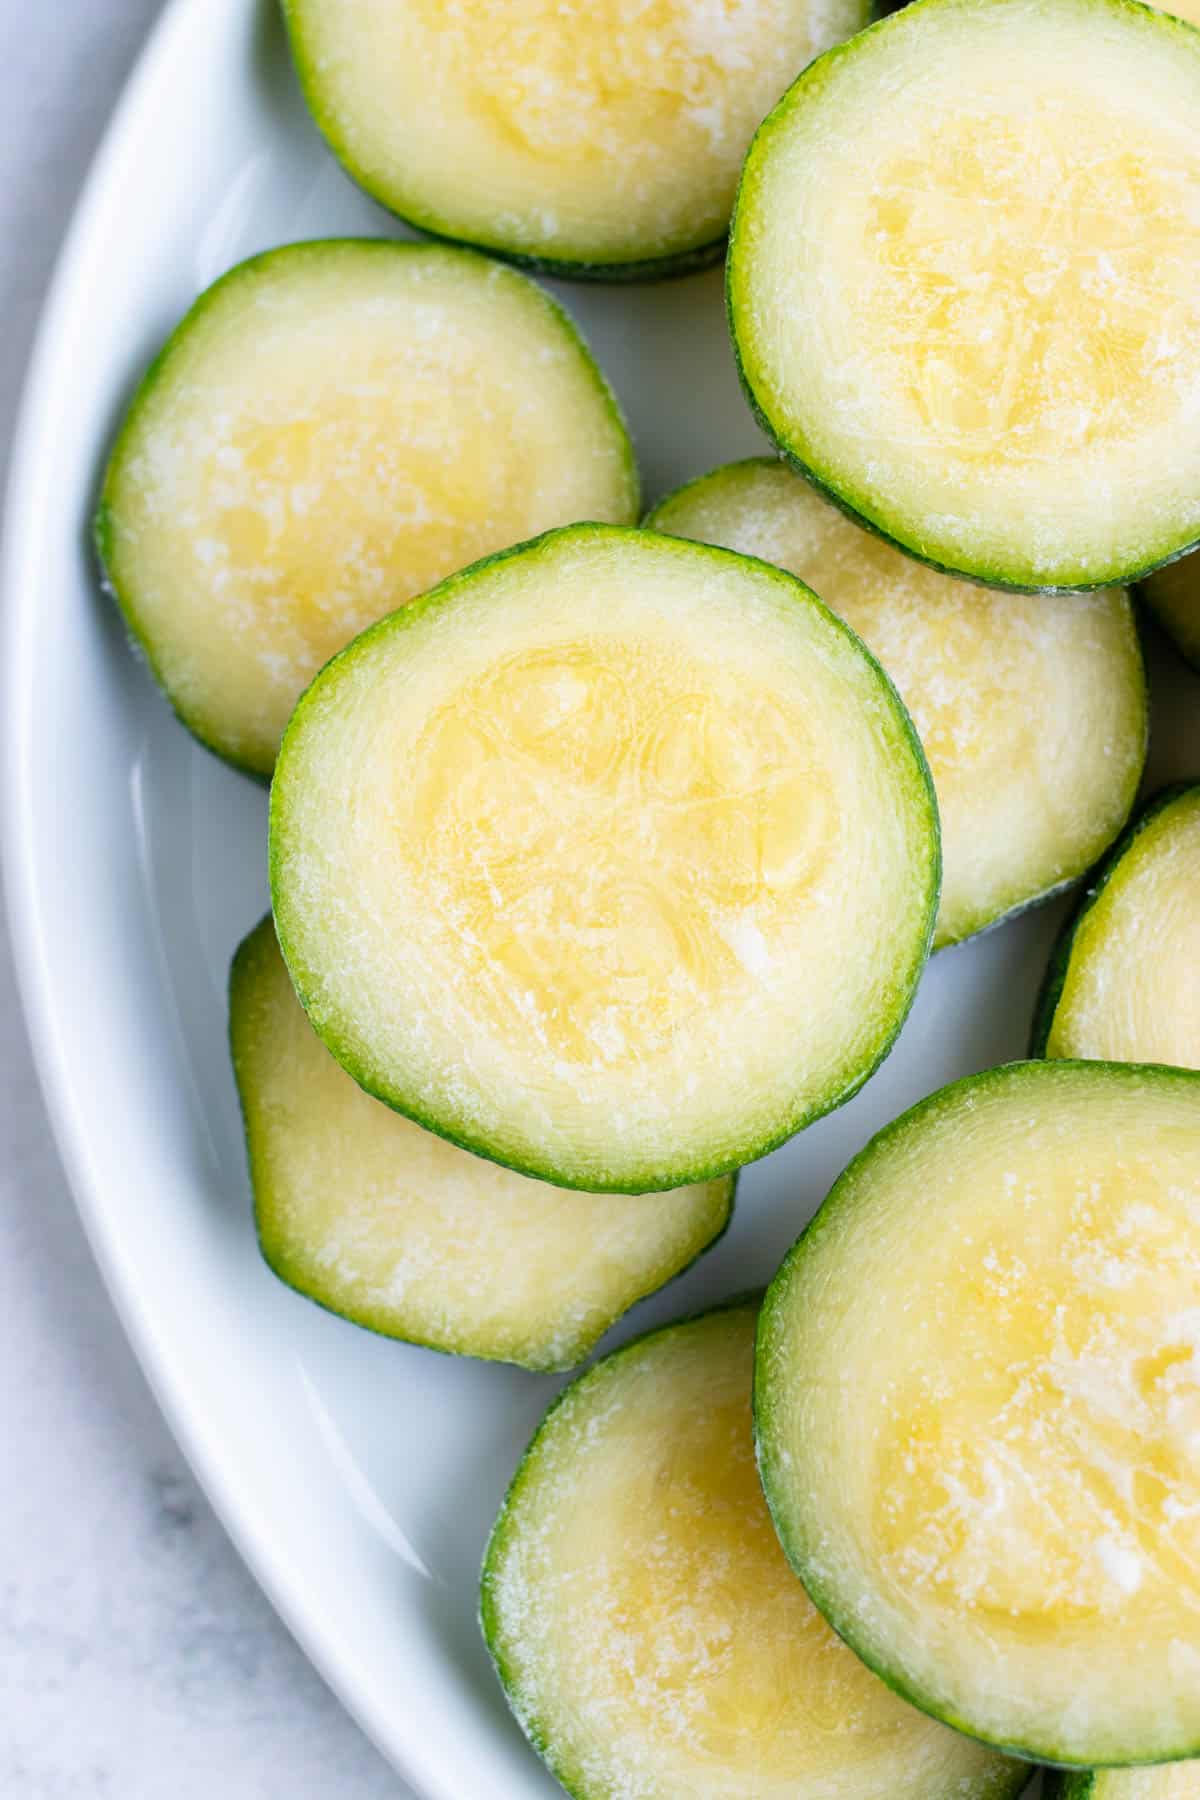 Fresh zucchini was frozen and the slices are now stacked on top of each other on a plate.